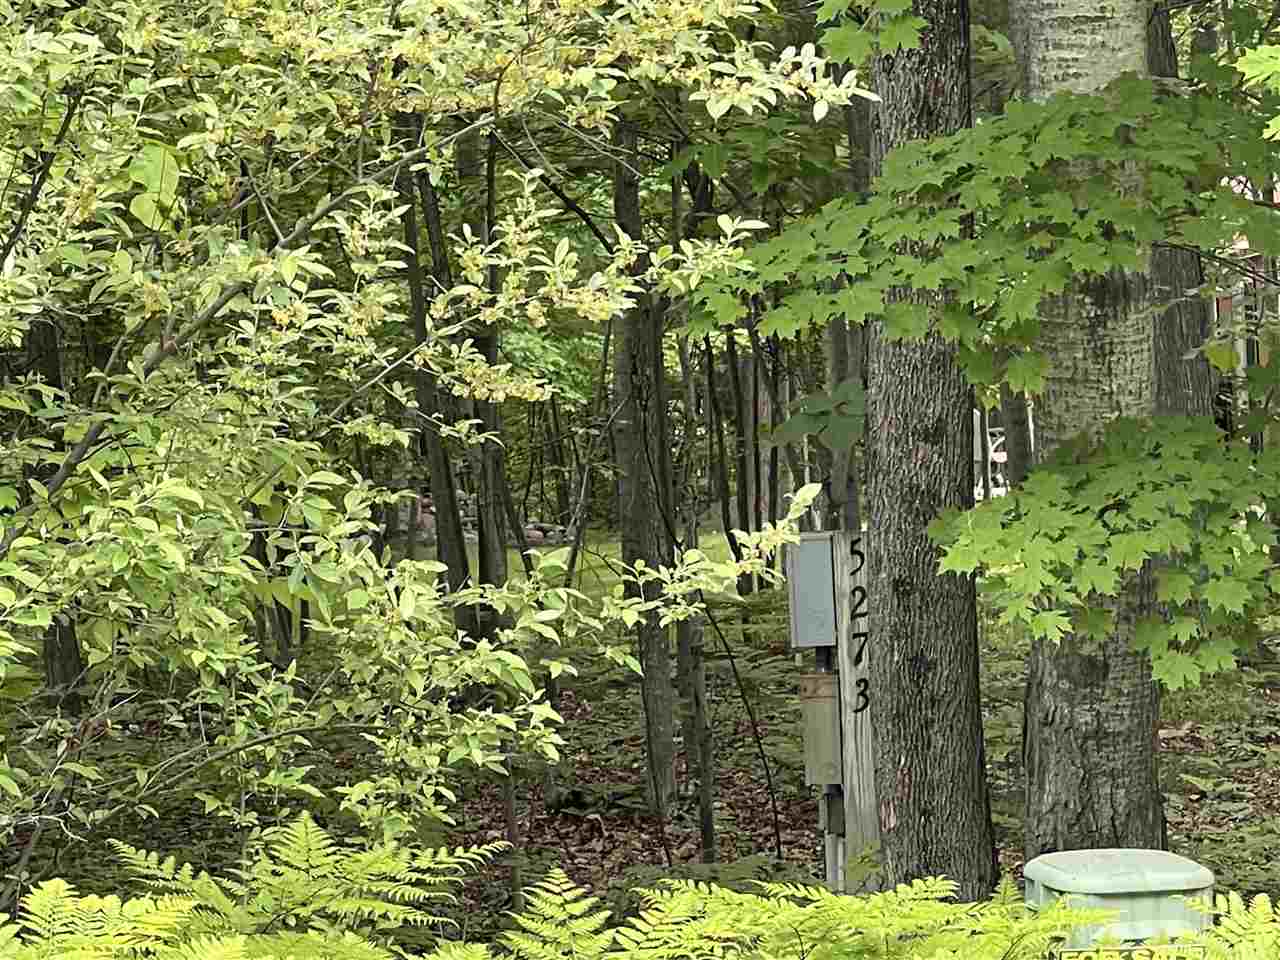 Nice shady lot with electric and drive.   Lot is adjacent to a soothing sound of a stream at the back. Located not far from Lake Circle Trail, which is a walk way around Lake Lancelot.   Also within walking distance to Kings Way Beach Club.   Create your niche and enjoy.    Build or Camp.   You will need to connect to the sewer system to pull camper on.   Ownership provides access to an 18 hole golf course , restaurant/pub, fitness center, indoor heated pool, tennis/bocce ball courts, chalet/sledding hill, walking (nature) trails, activity bldg, storage area, 2 all sports lakes, Lk Lancer/Lancelot, 15 beach clubs (5 with beach/bath house). Or fly to/from Sugar Springs off a 3500ft well maintained grass airpark.   www.airnav.com   5M6.    ALL just 2-1/2 hours from Detroit!